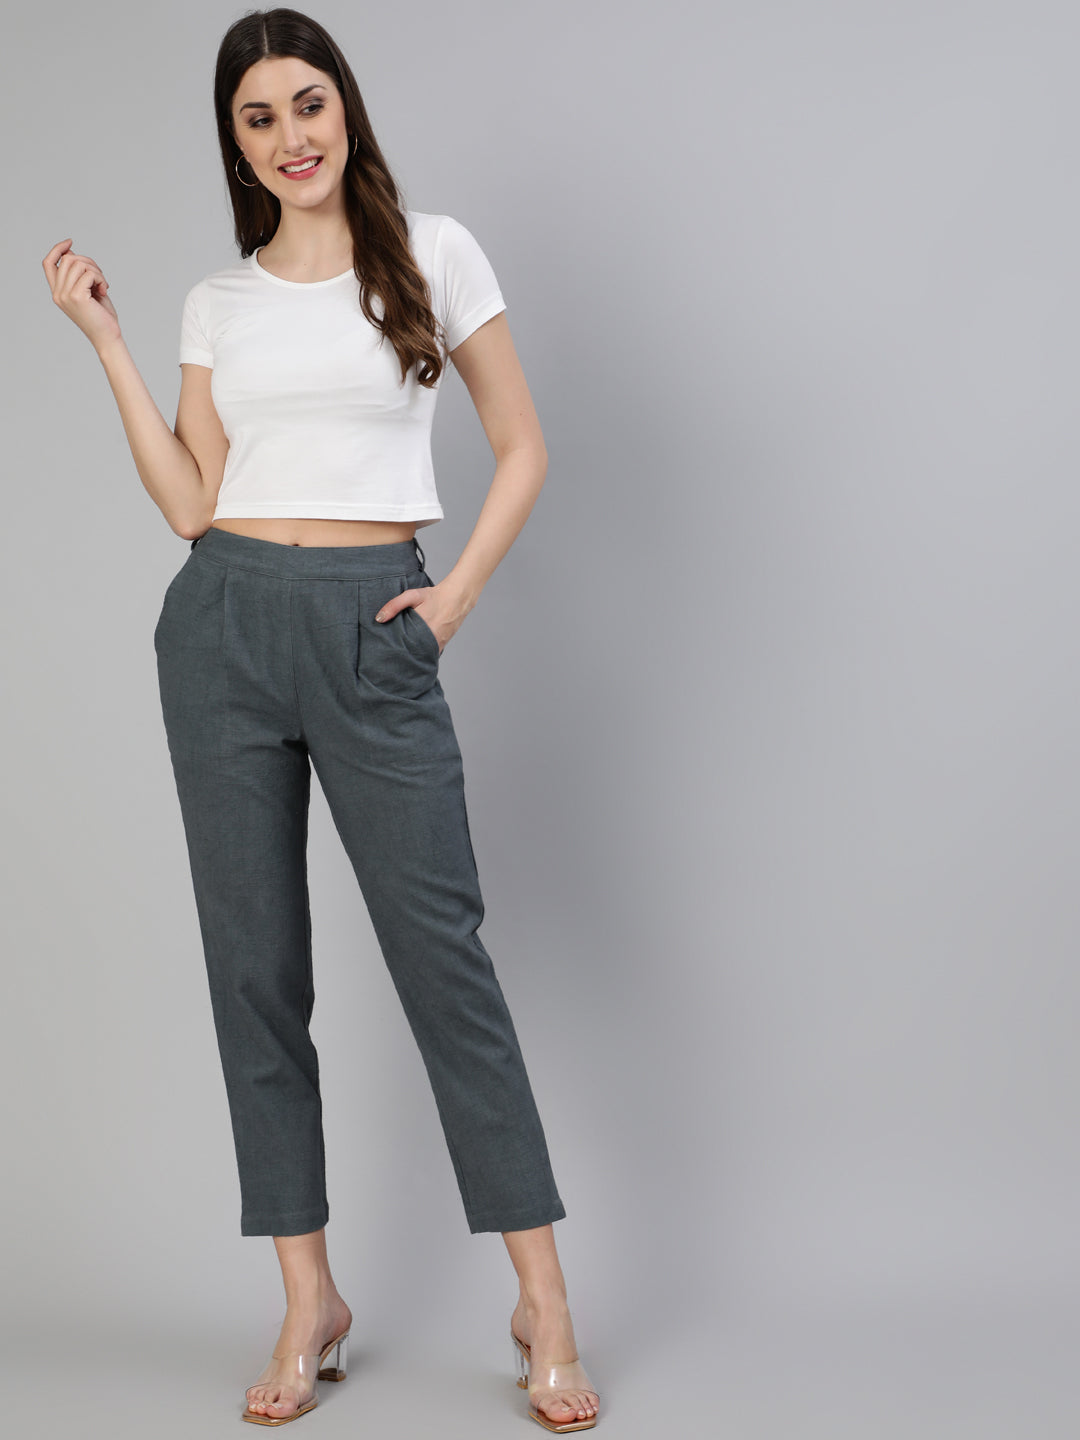 Get casual Pants for Women